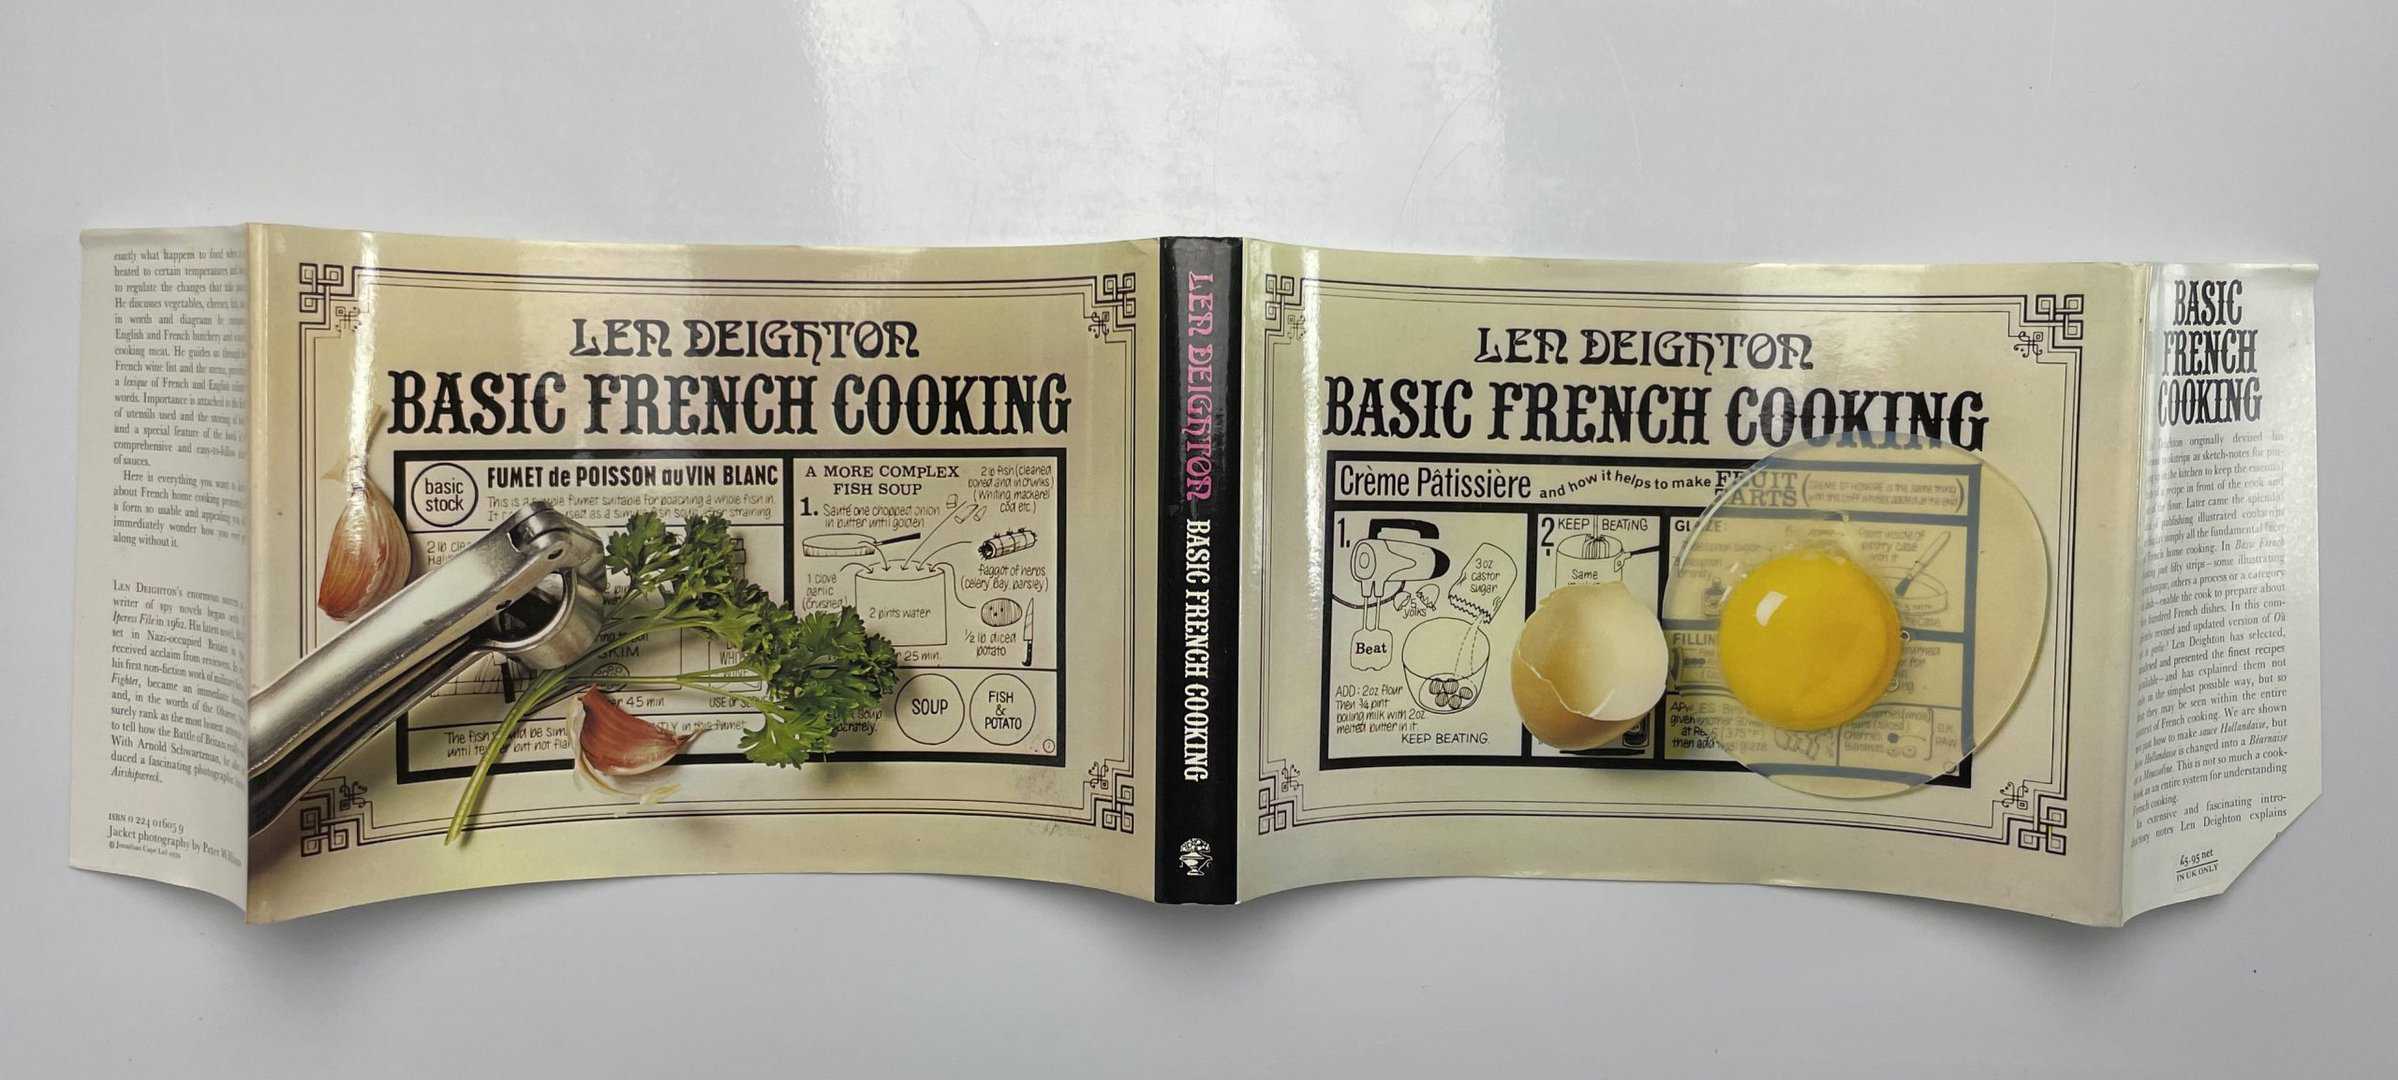 len deighton basic french cooking first ed4